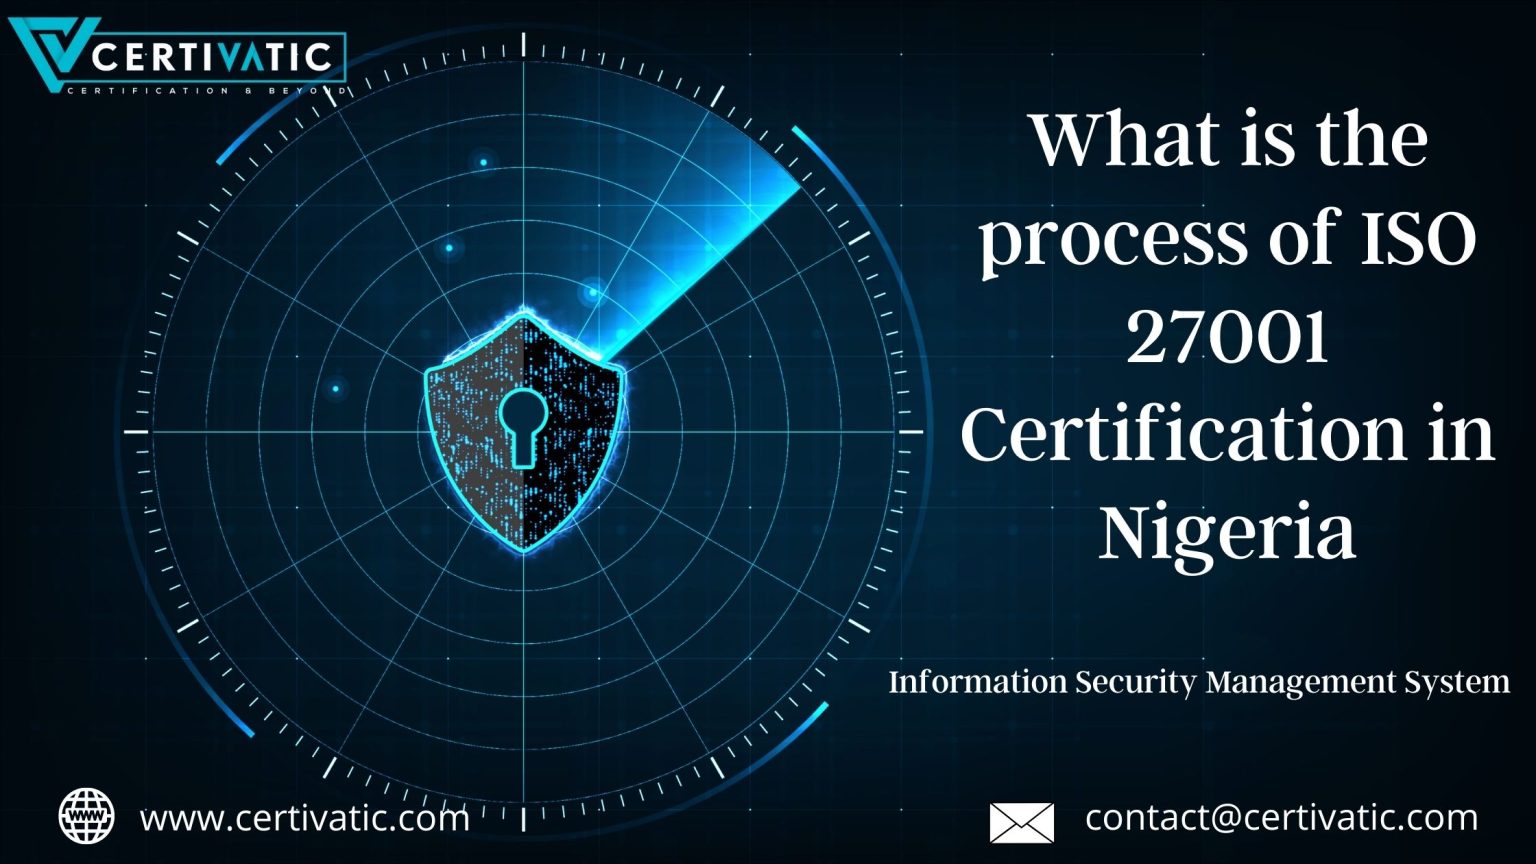 What is the process of ISO 27001 Certification in Nigeria?